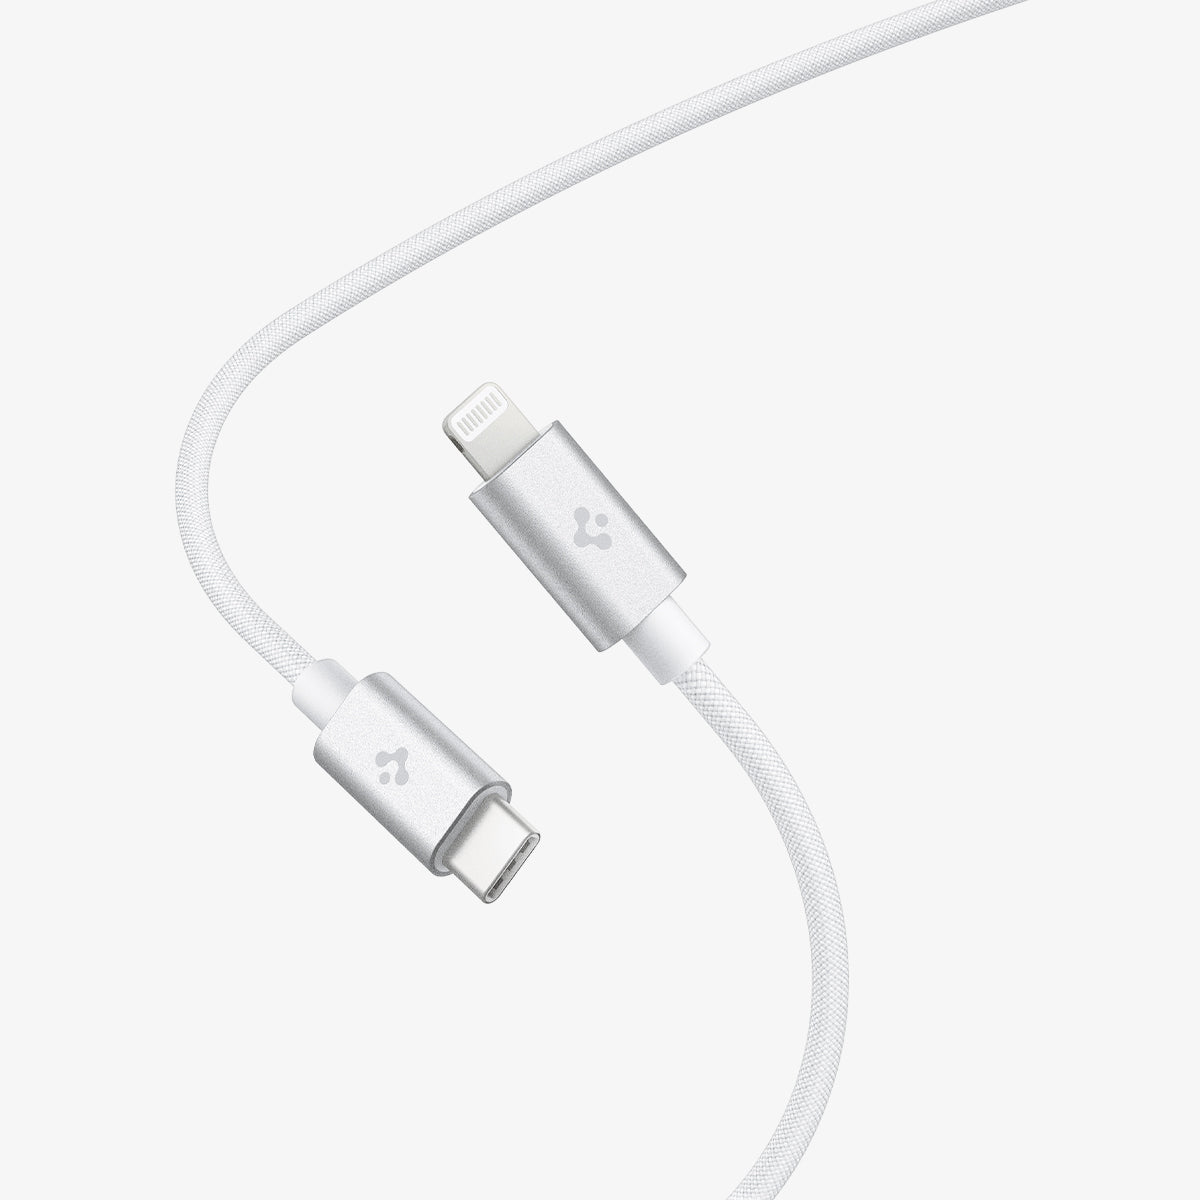 ACA04467 - ArcWire™ USB-C to Lightning Cable PB2200 in white showing both ends of the cable